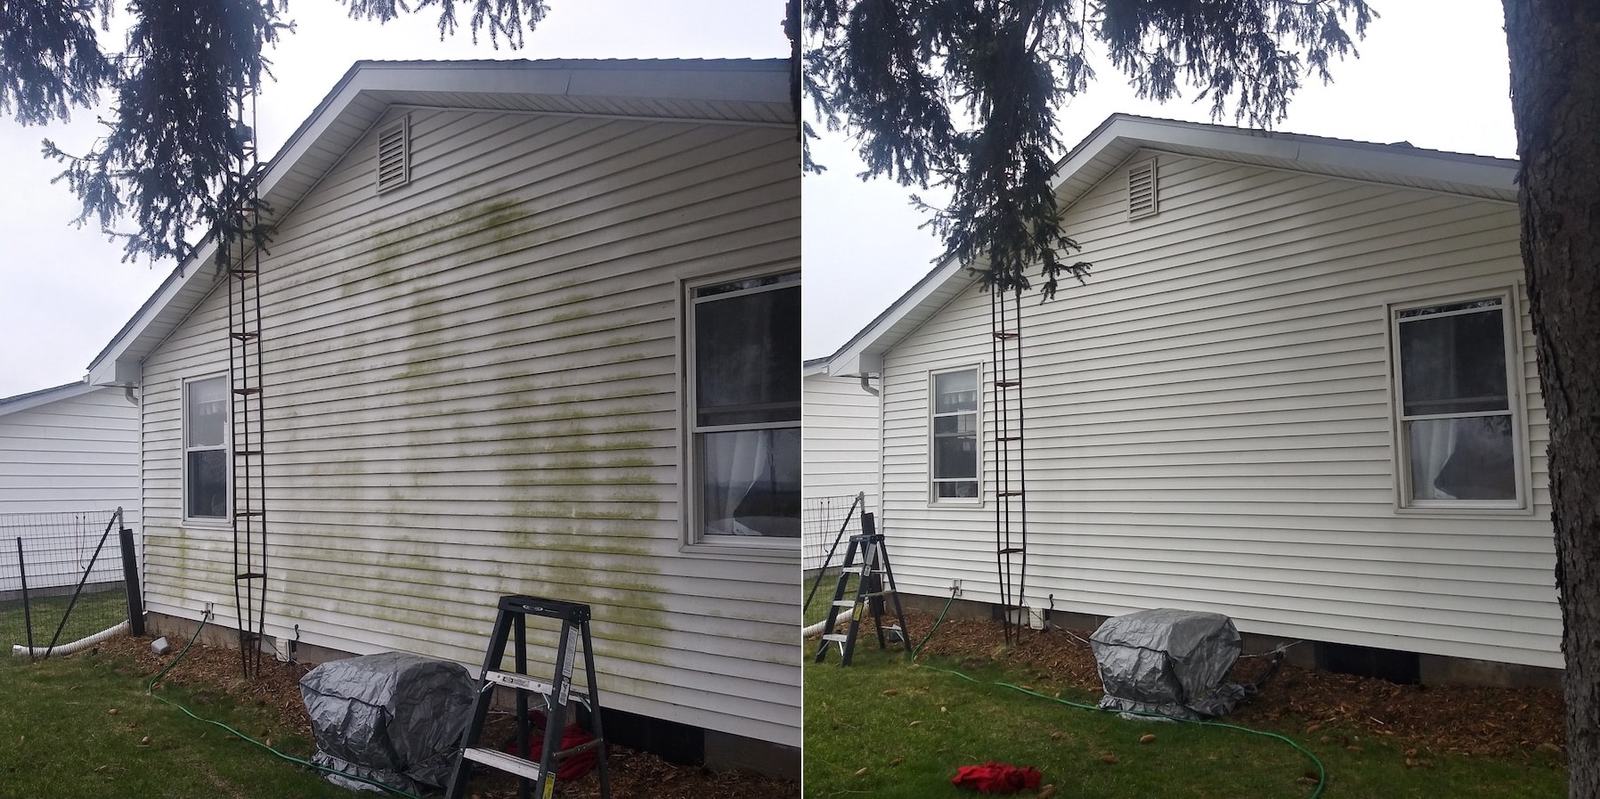 Before and After Power Washing